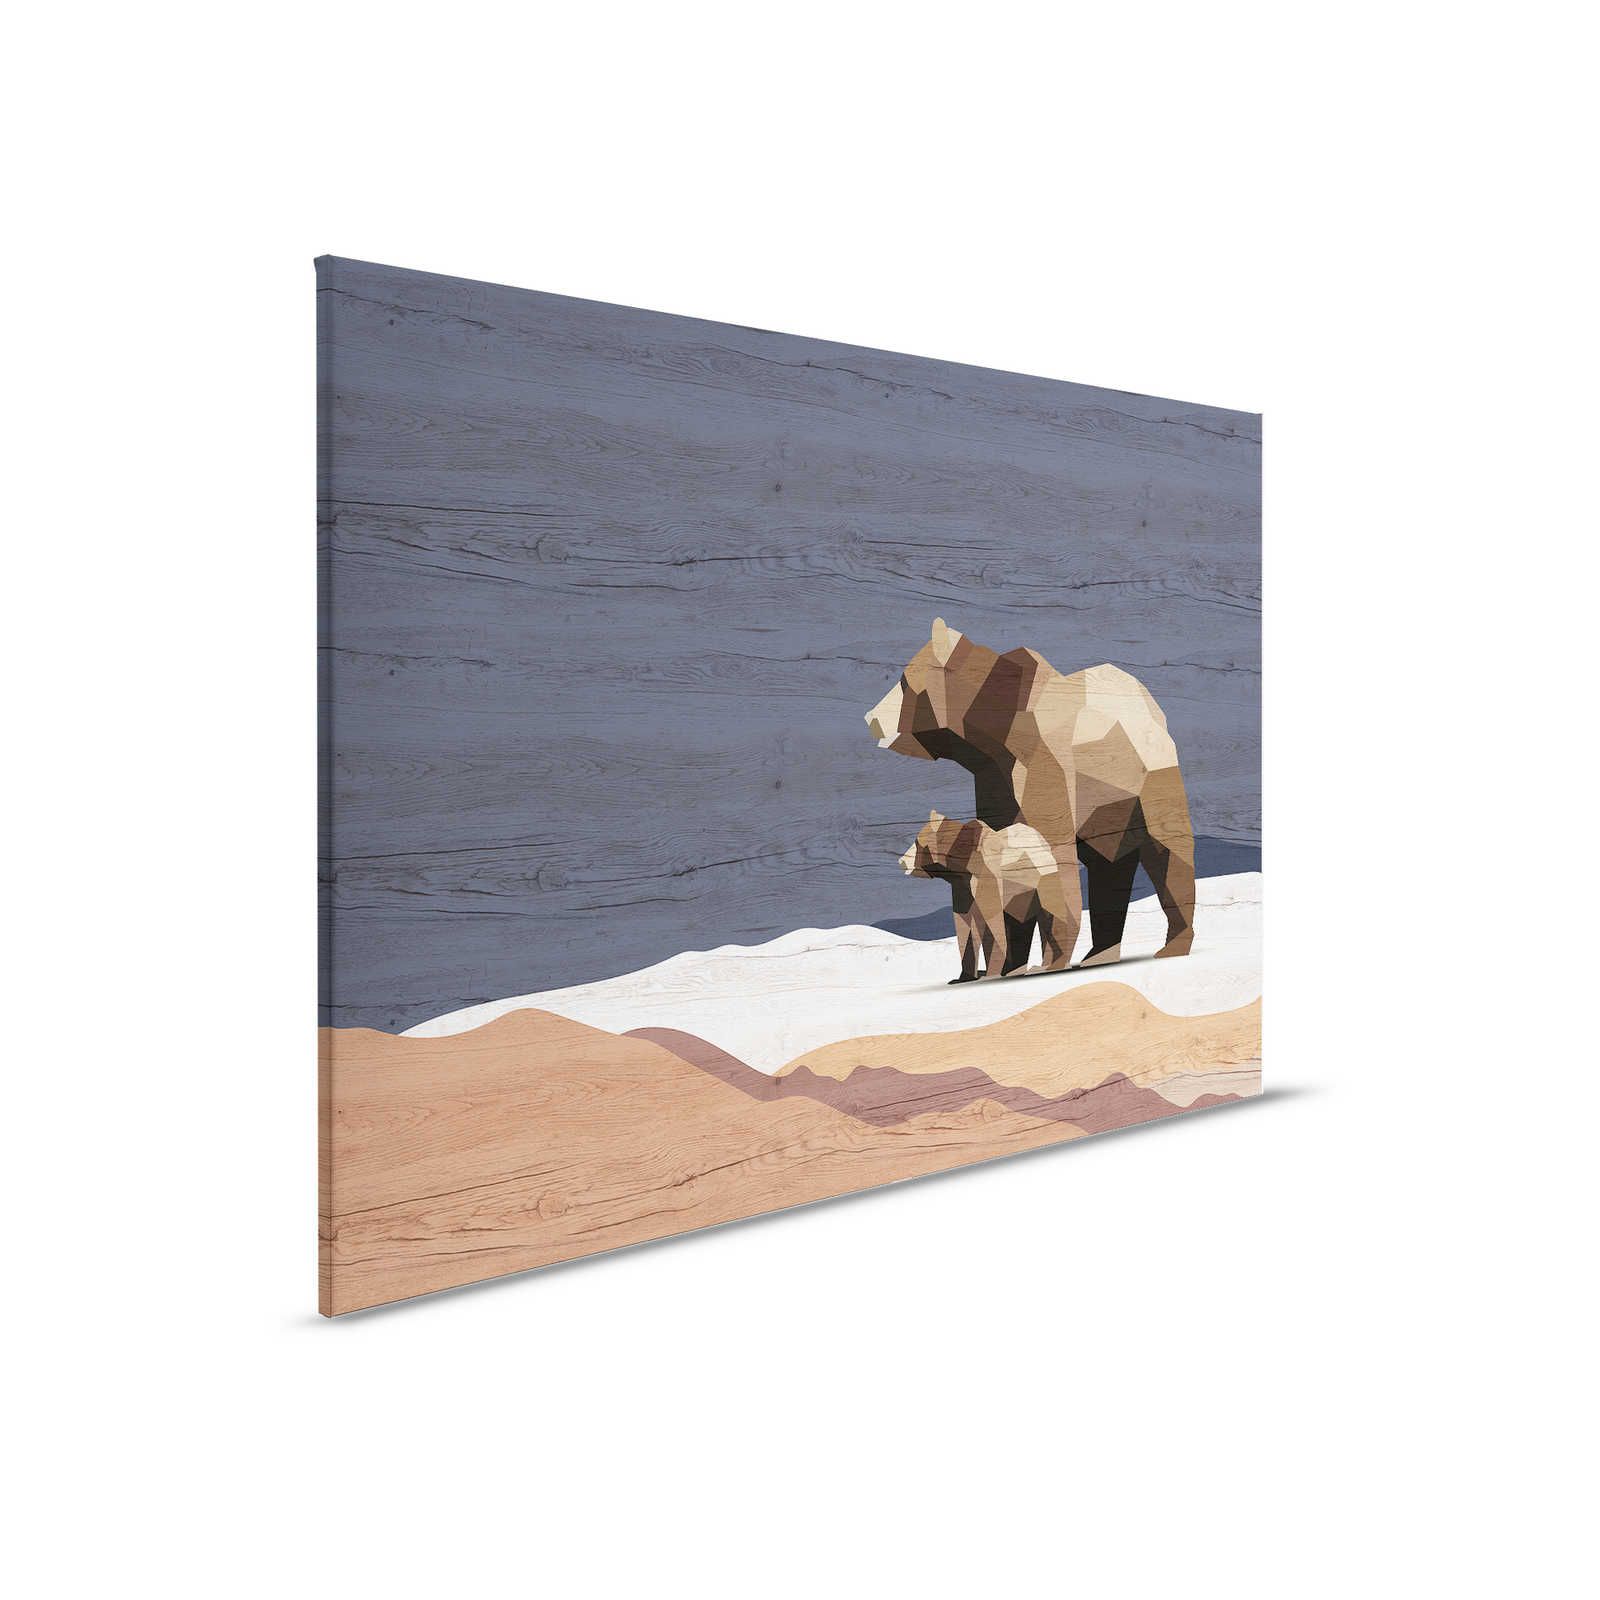 Yukon 3 - Canvas painting Bears Family in facet design & wood look - 0,90 m x 0,60 m
